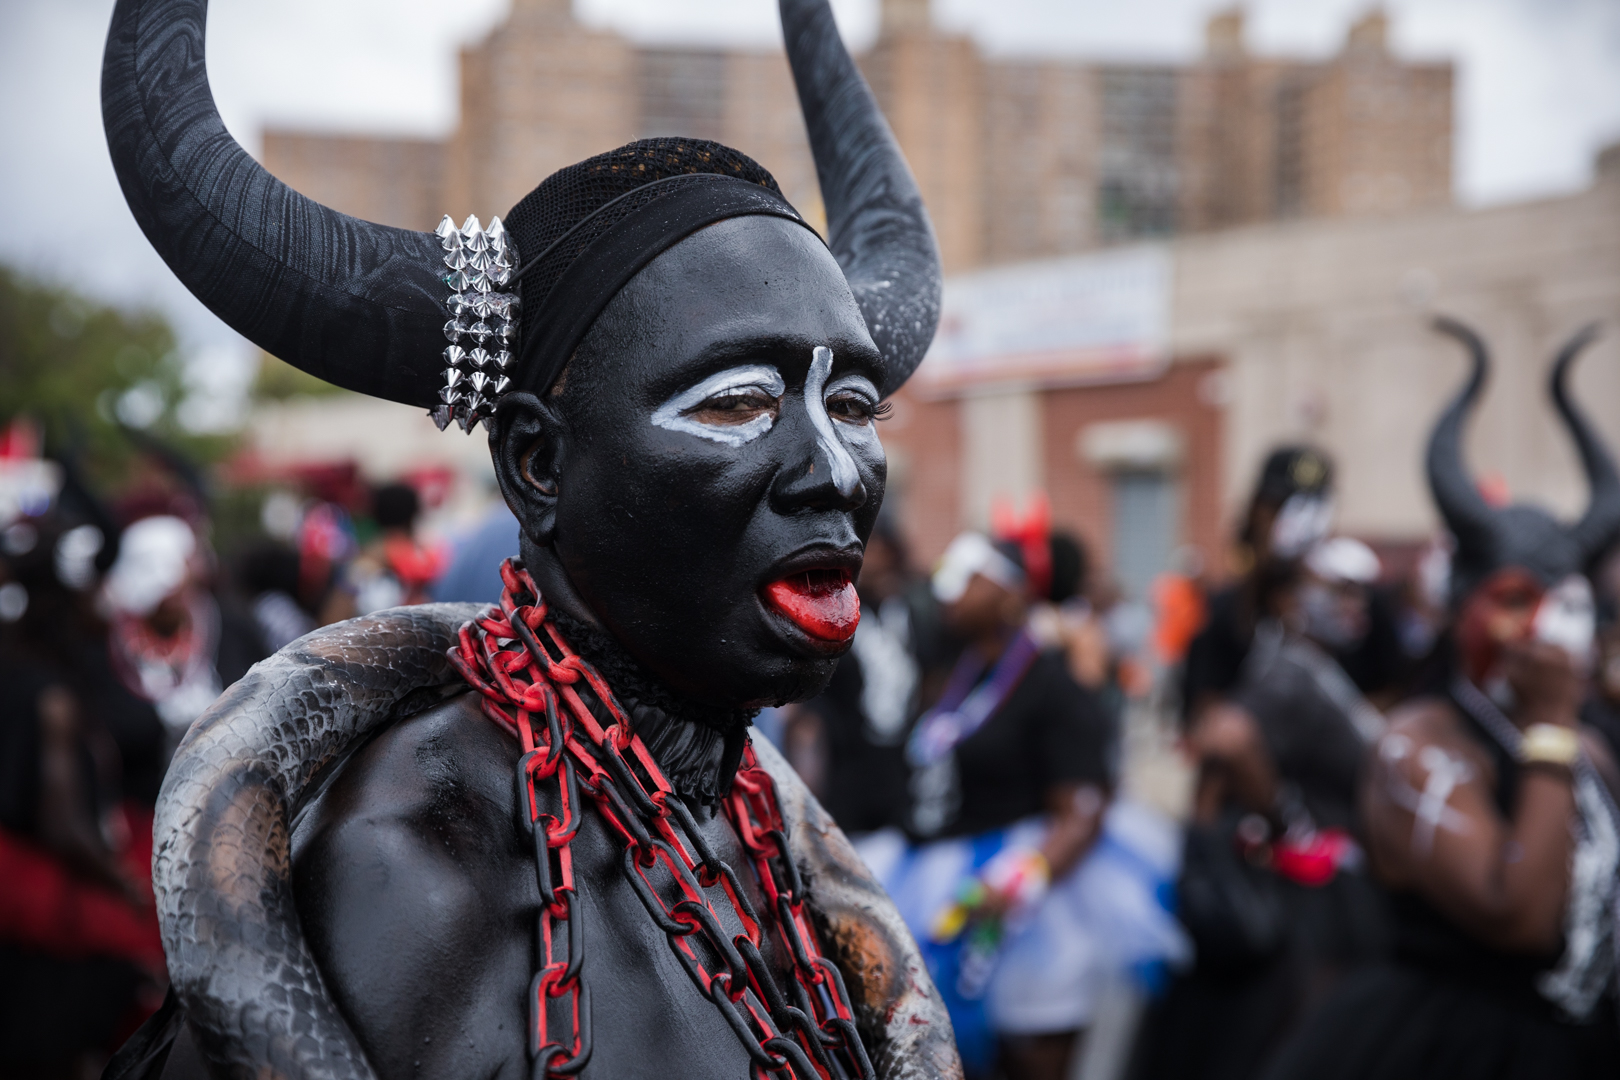 A participant dressed in a devil costume poses.